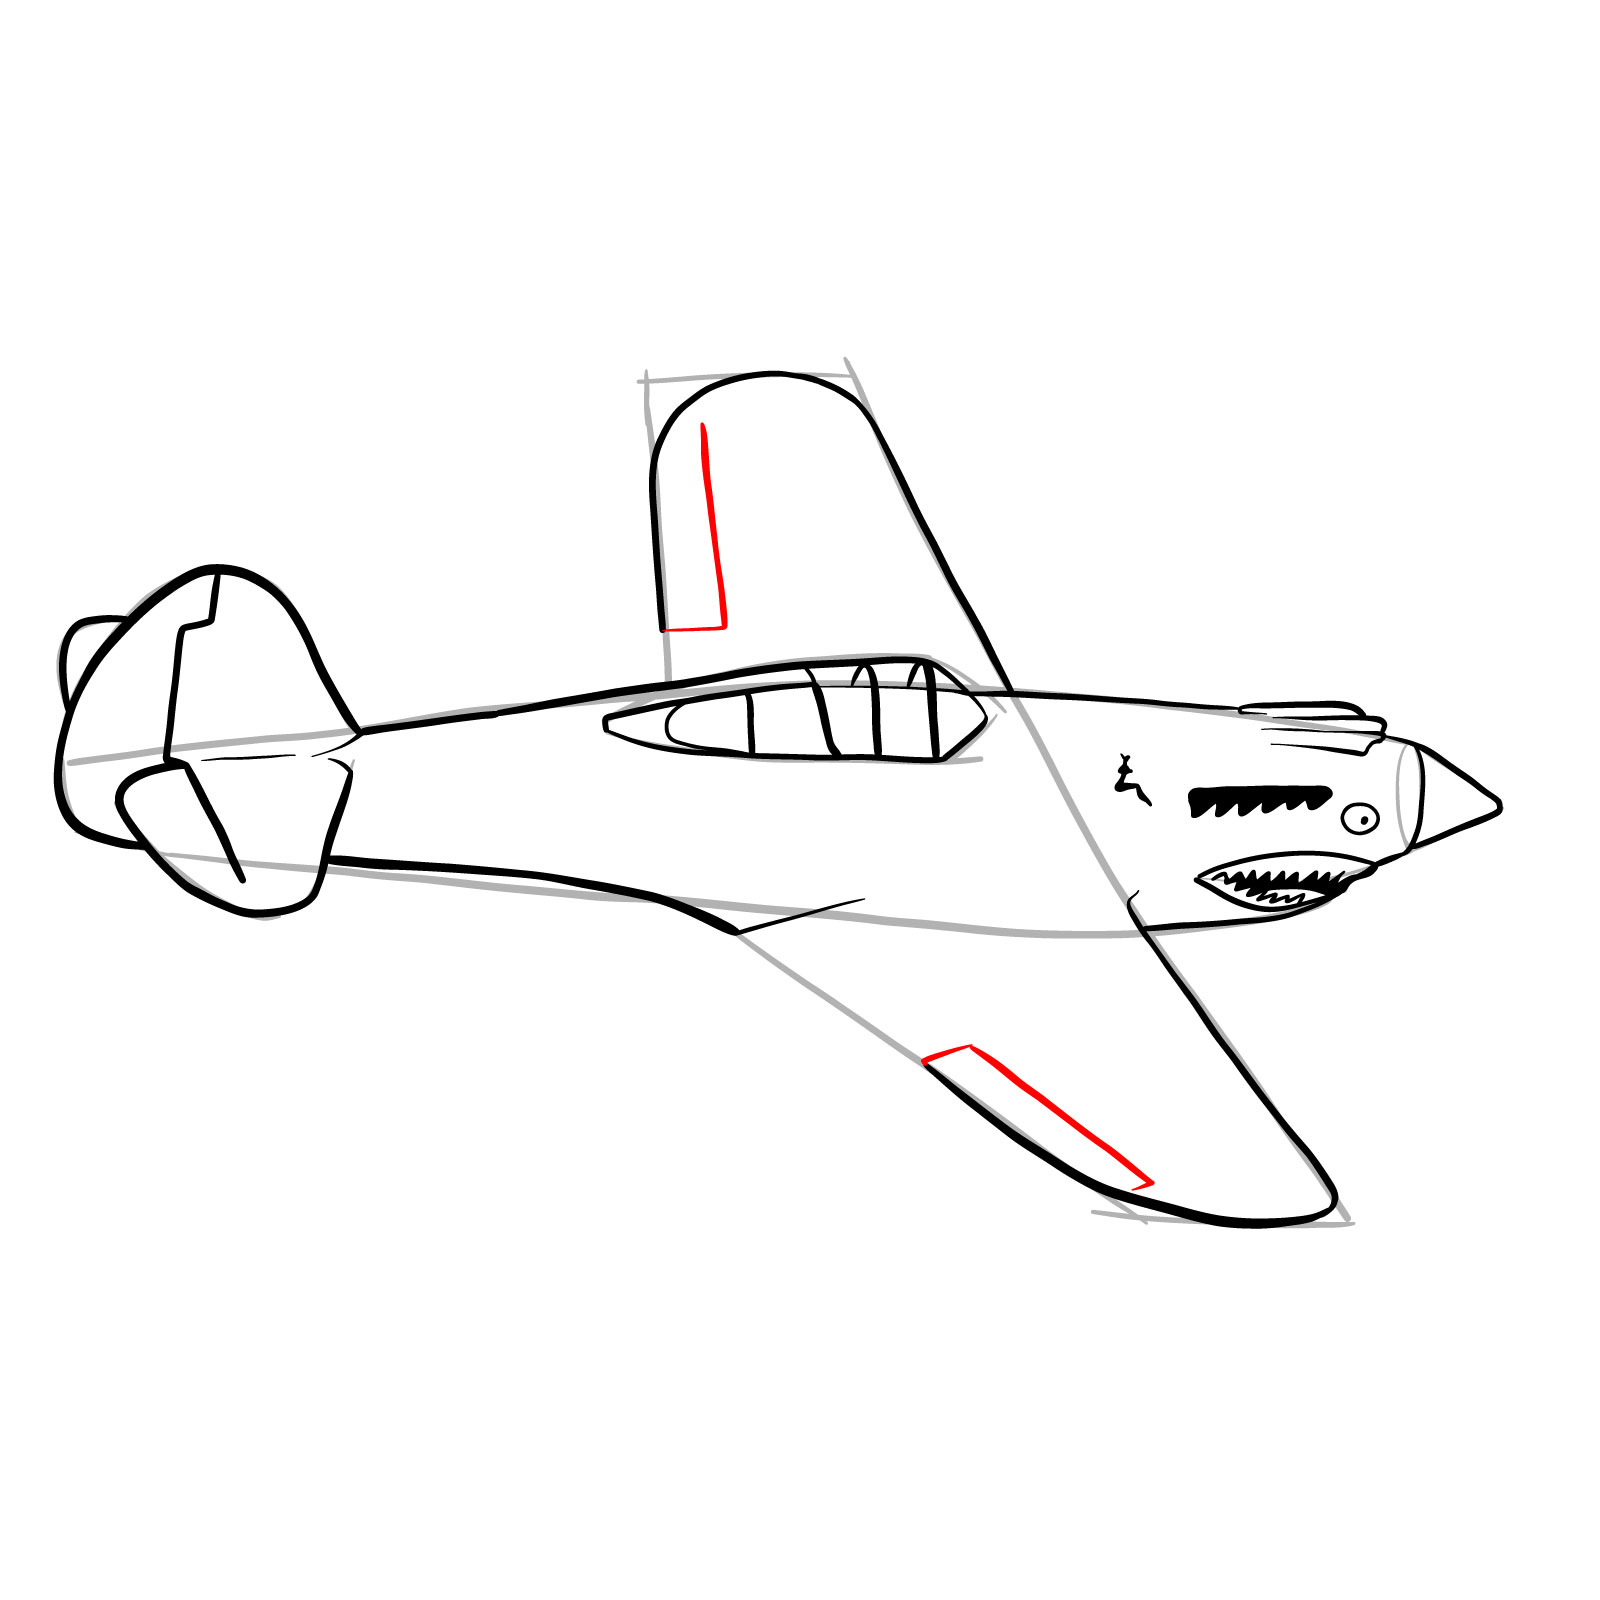 How to draw a P-40 Flying Tiger - step 22